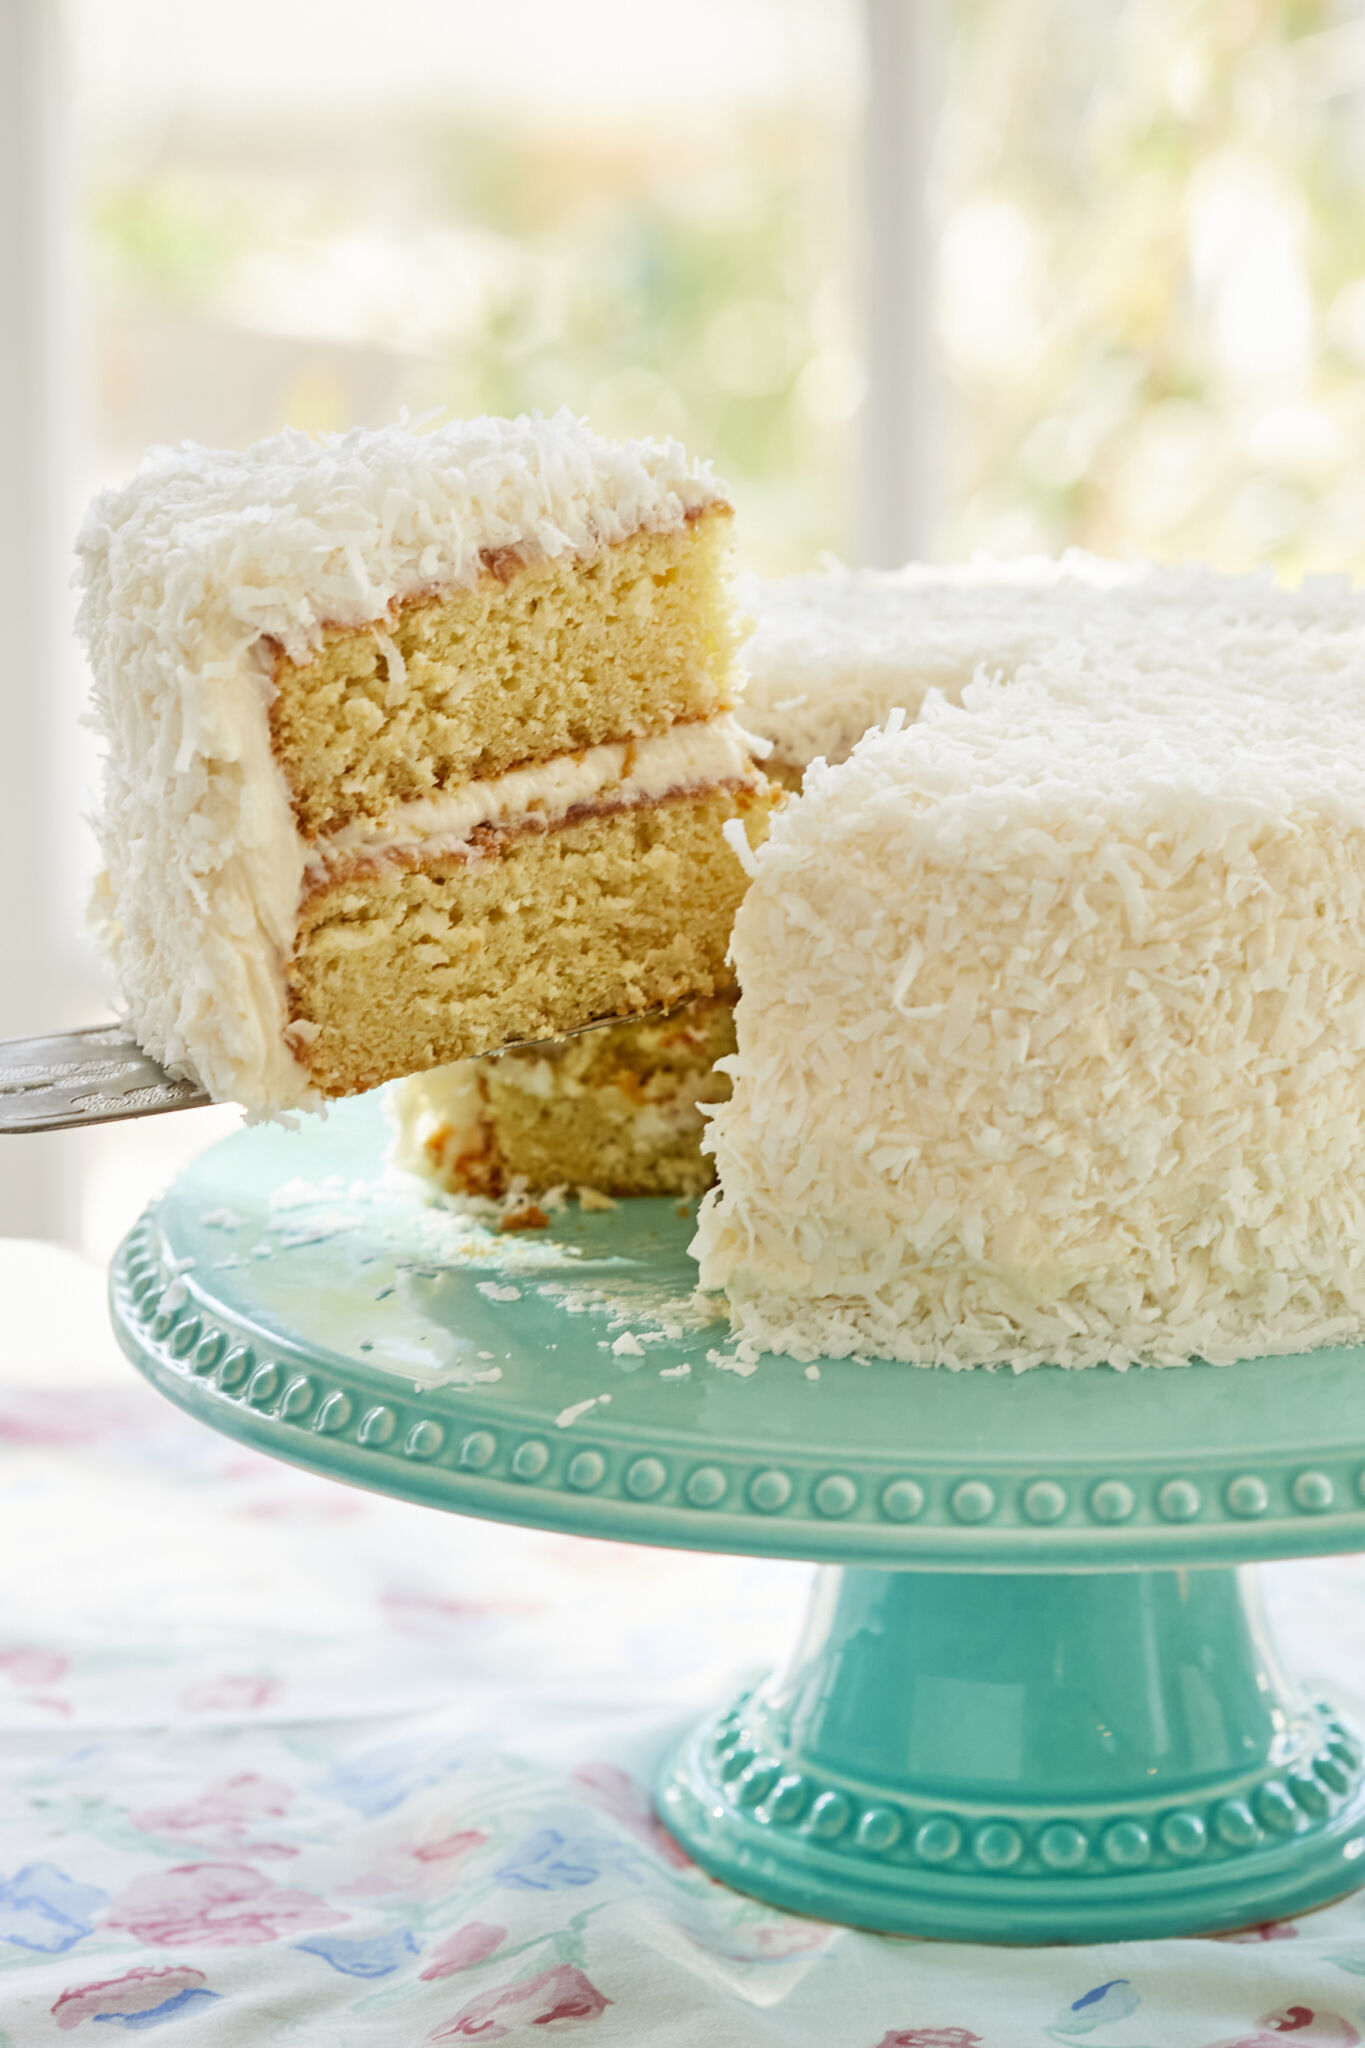 A slice was cut from and being lifted off the perfectly baked two-layer moist coconut cake, with white frosting between layers and on the outside. Topped with crunchy coconut.